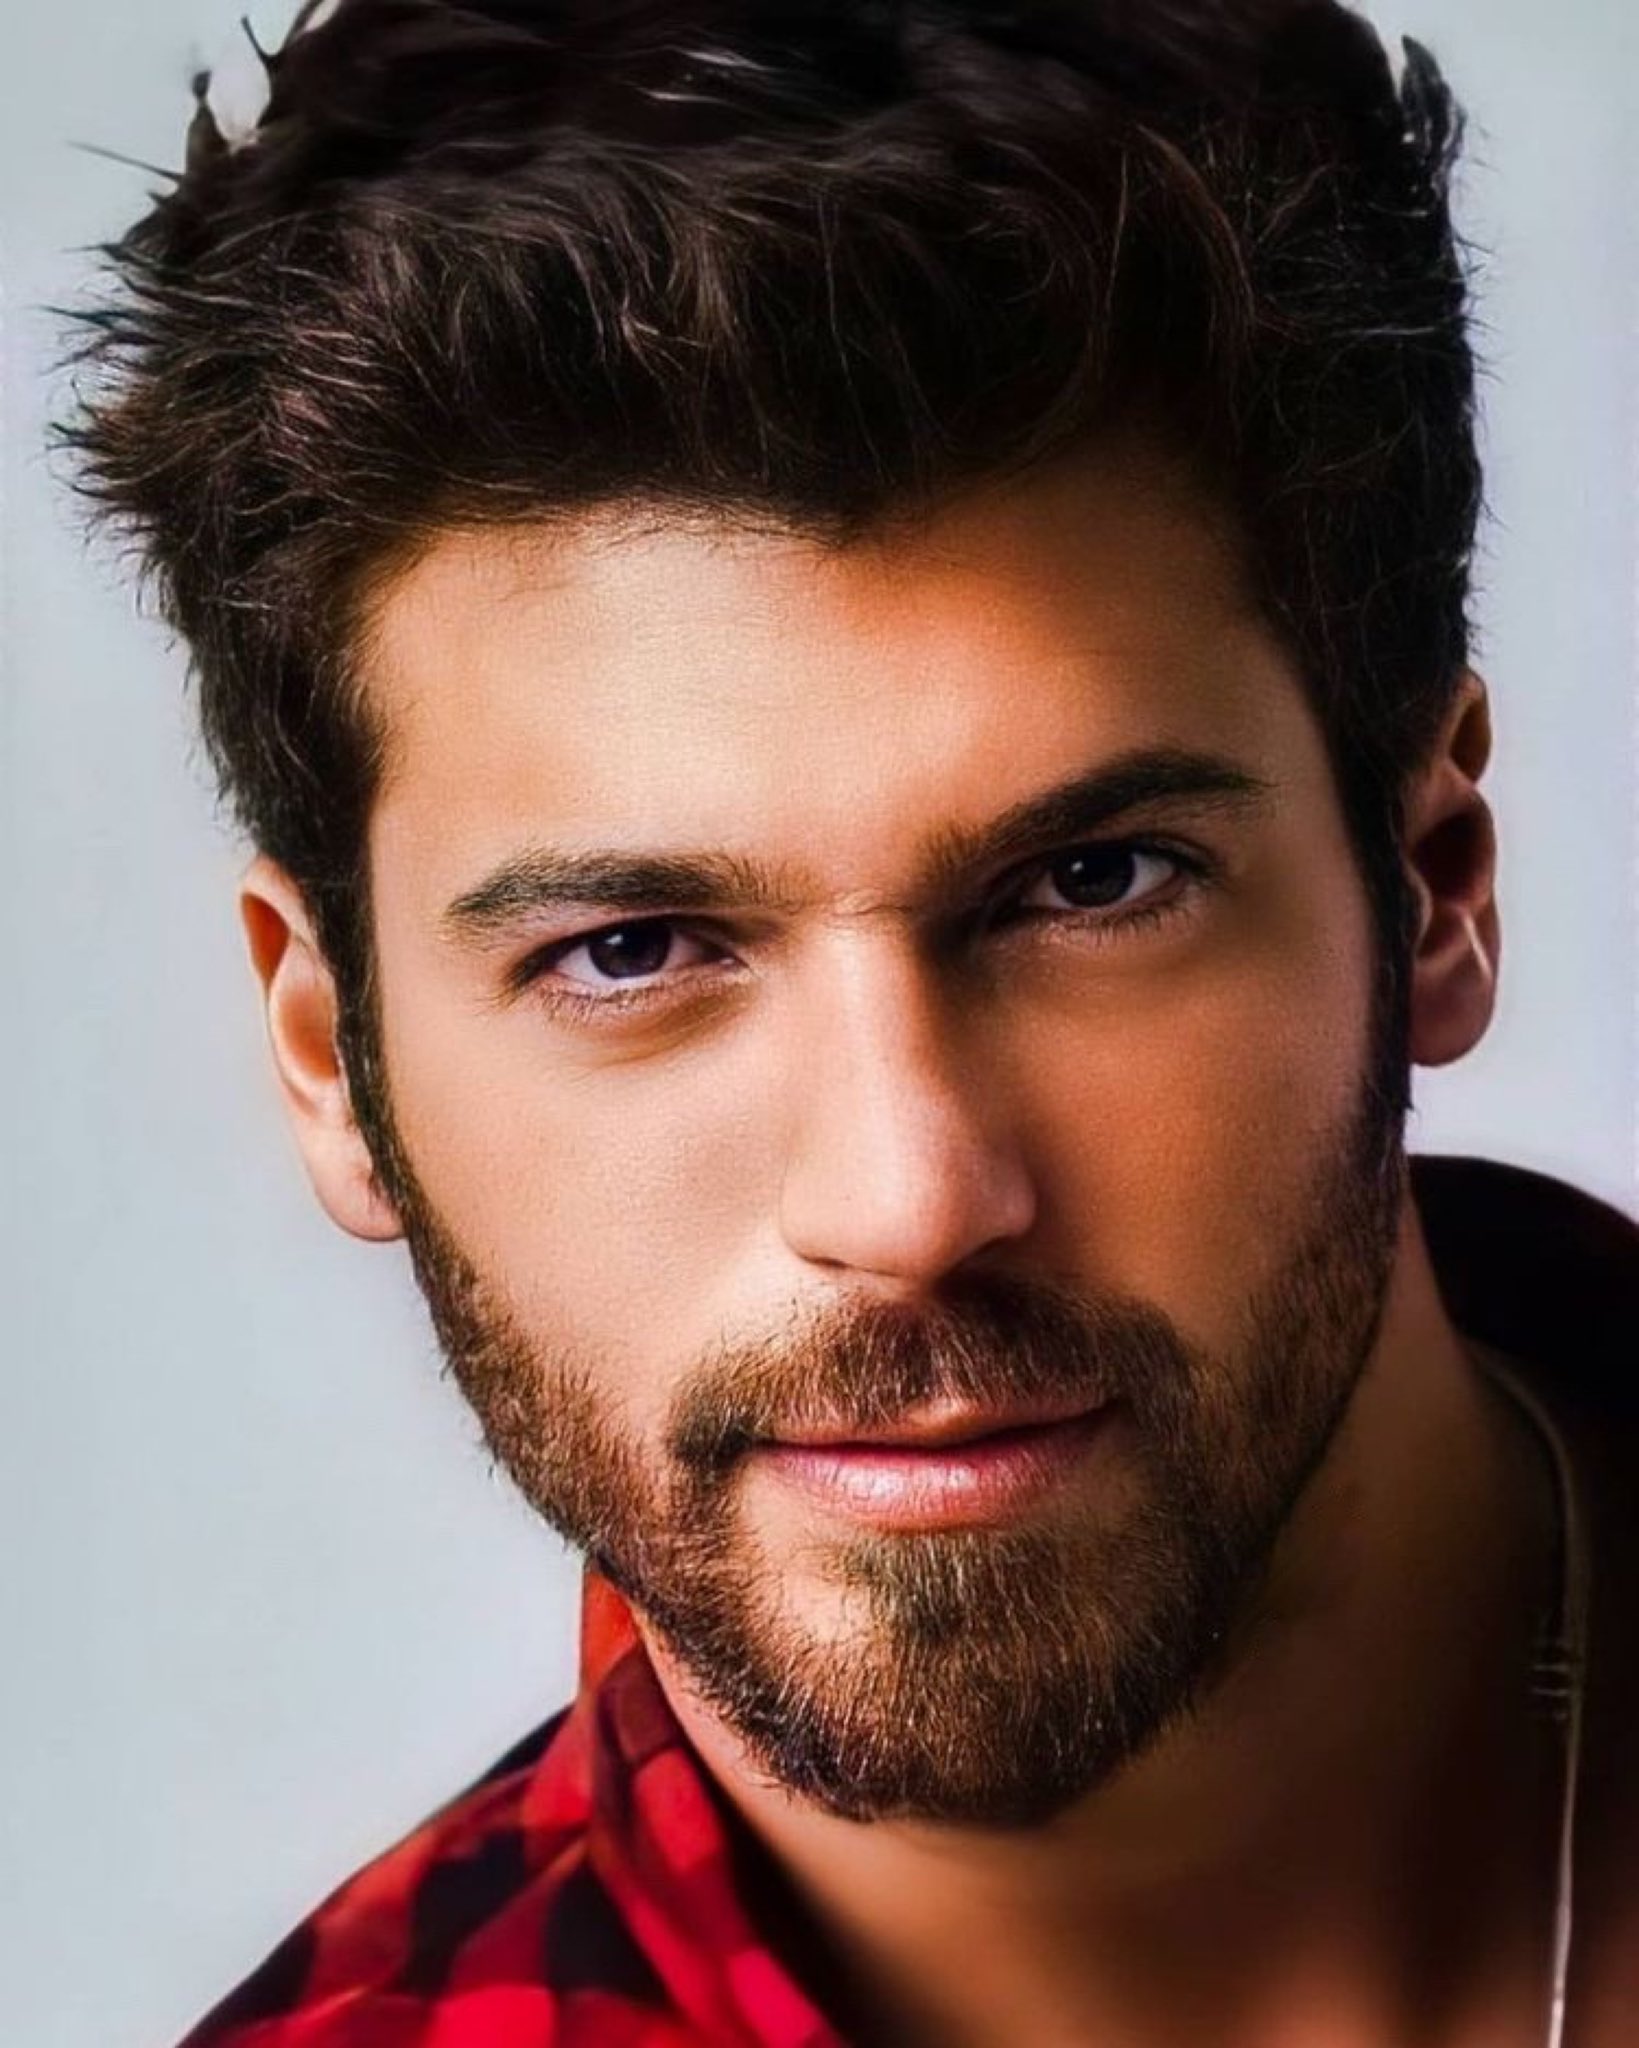 CAN YAMAN HAS A NEW ADMIRER AND IS ONE OF THE MOST FAMOUS FACES ON TV!